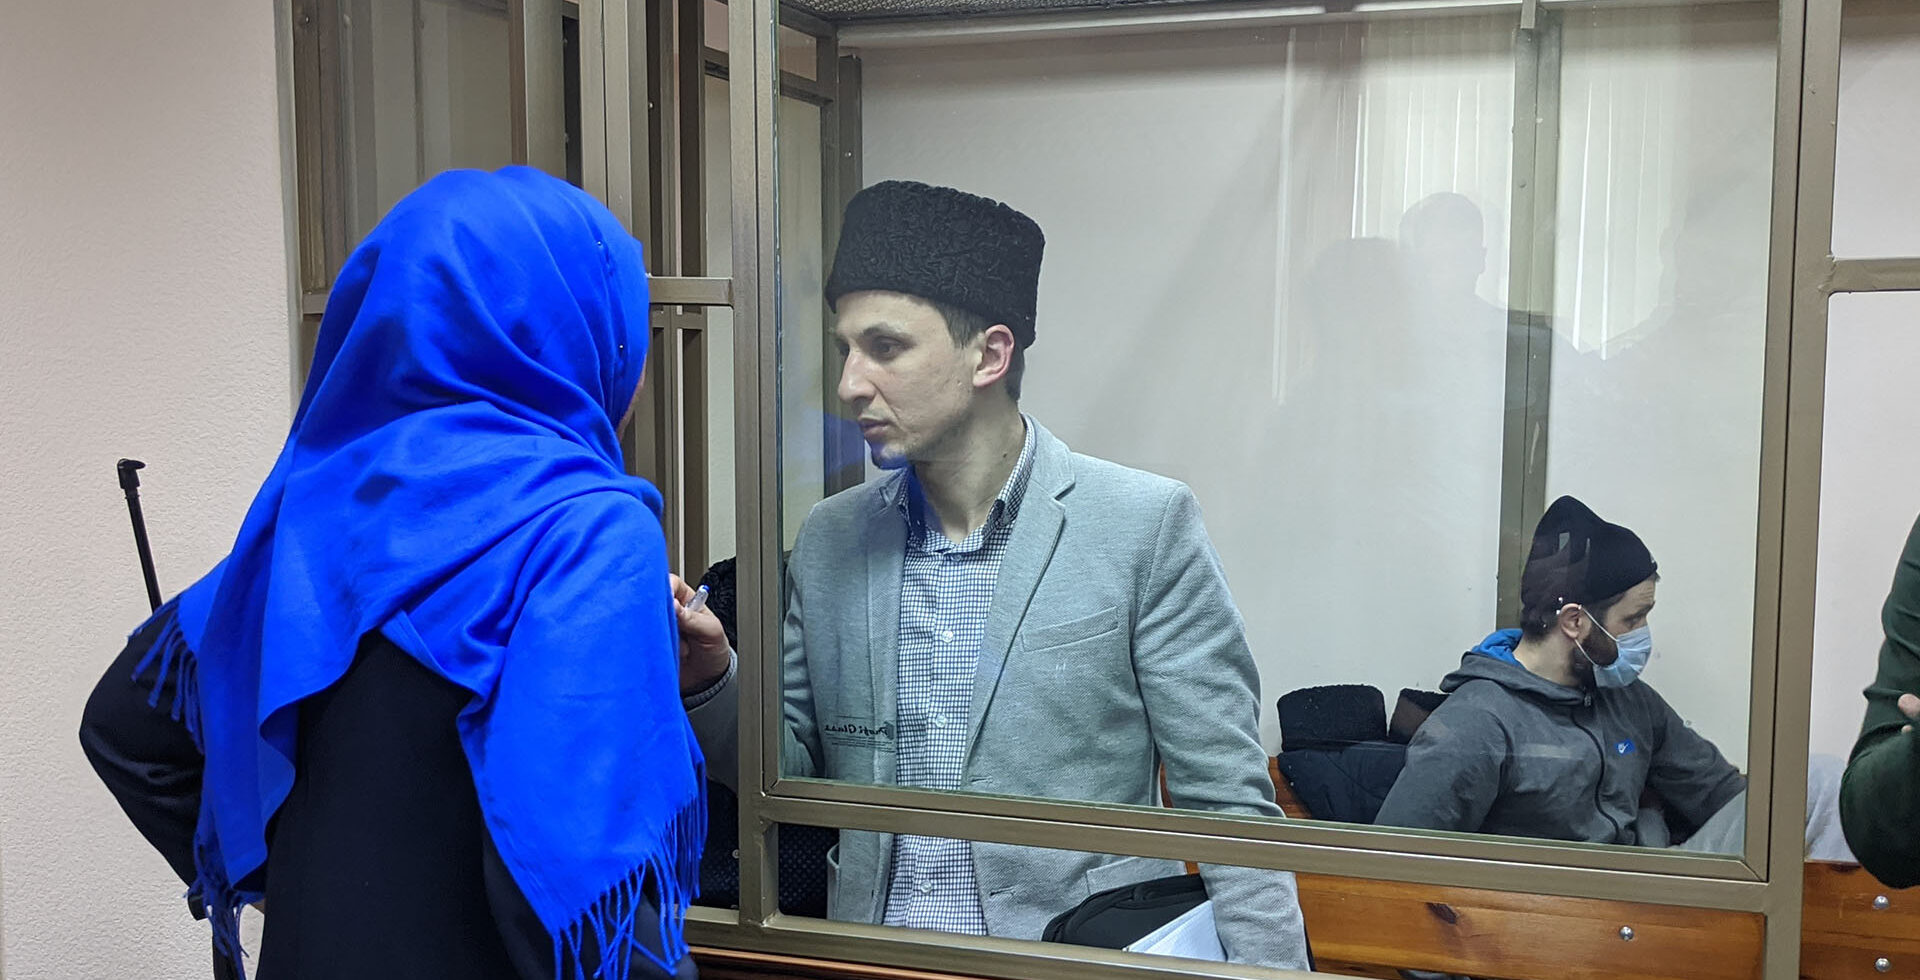 Server Mustafayev in court speaking to a woman in headscarf